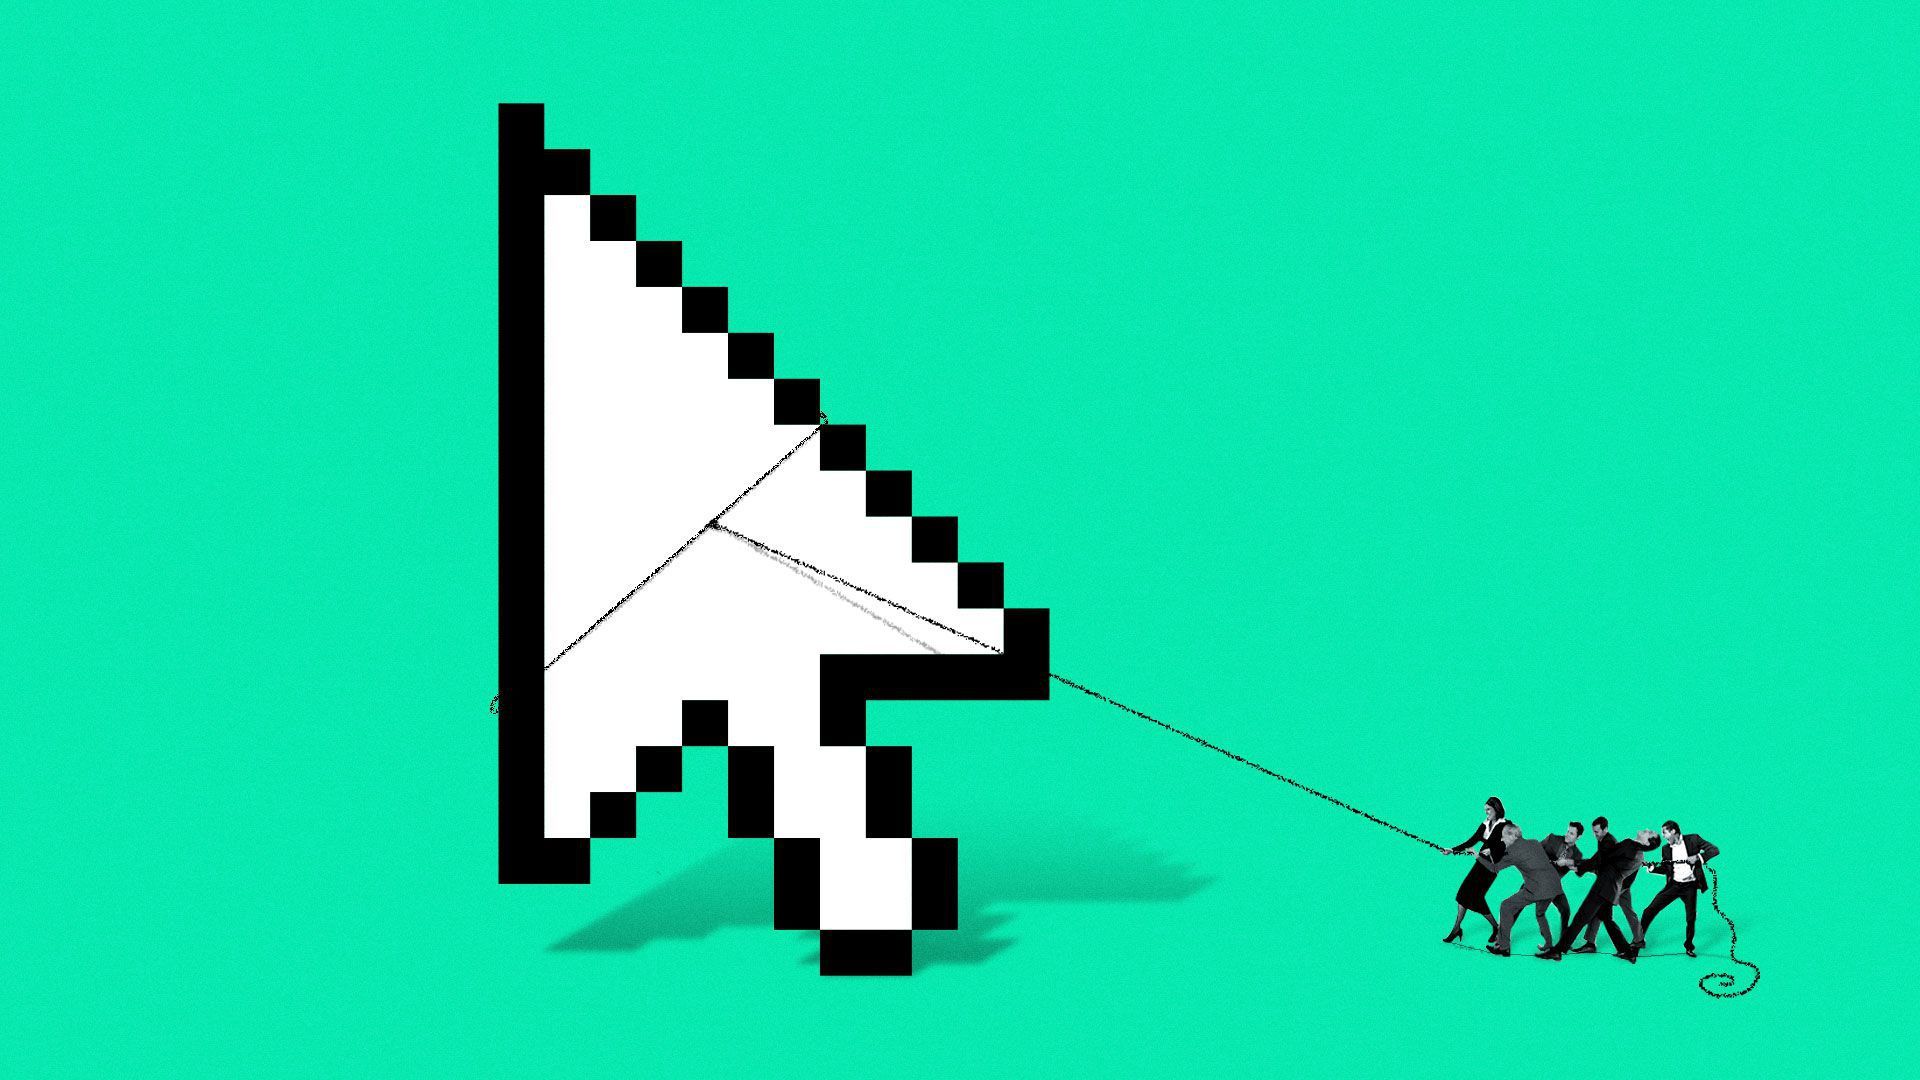 An illustration of a group of people pulling a cursor